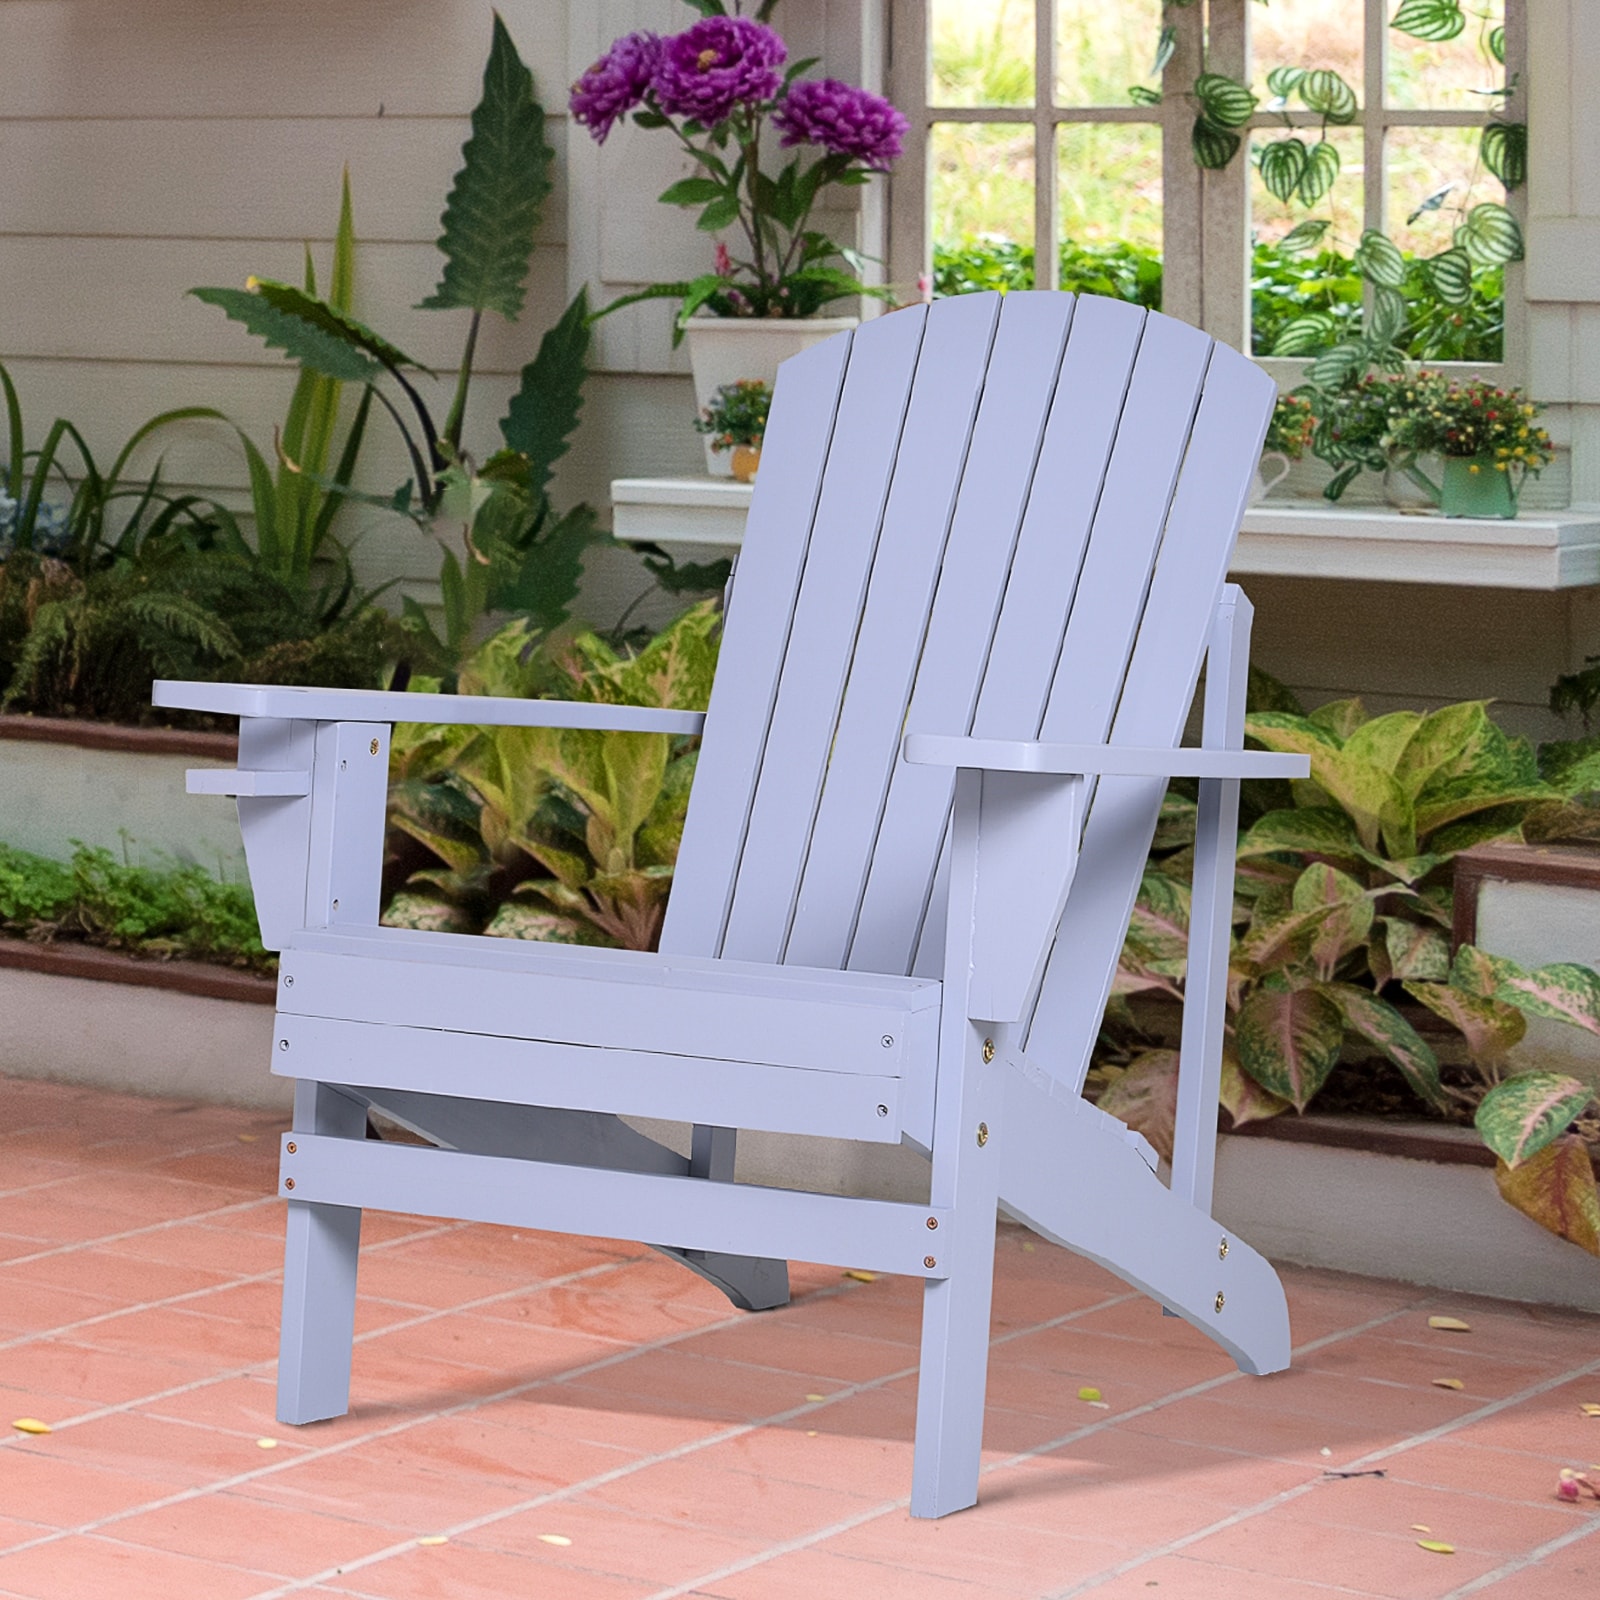 Wood Adirondack Chair Outdoor Patio Chaise Lounge Deck Reclined Bench Porch 